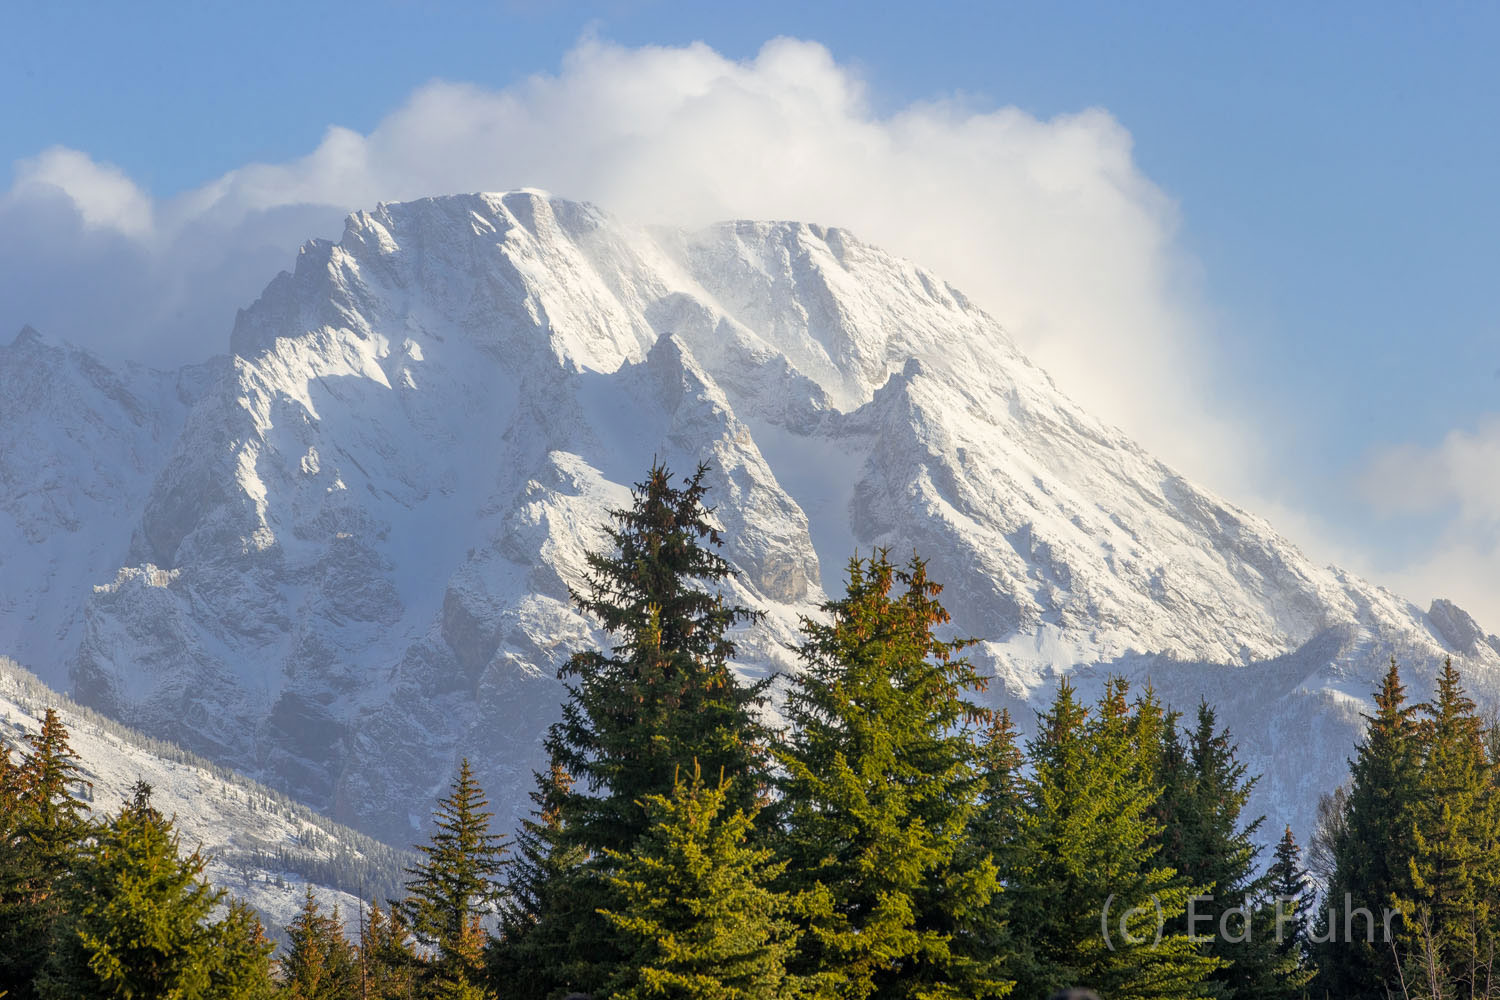 Mount Moran, still cloaked in winter's snow, looms high above the landscape.